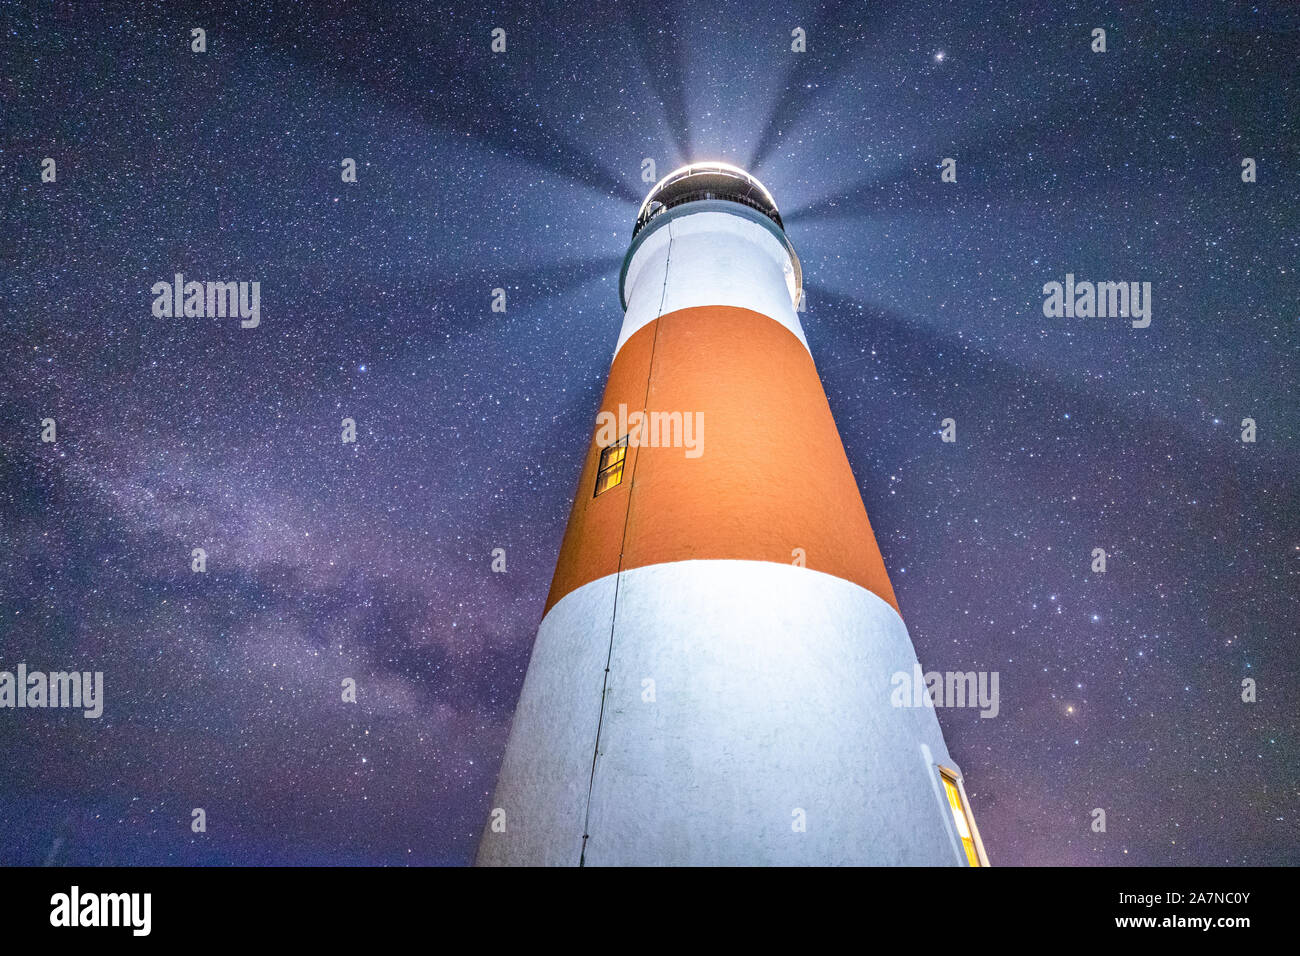 Milky way galaxy stretching behind light house on Nantucket. Stock Photo